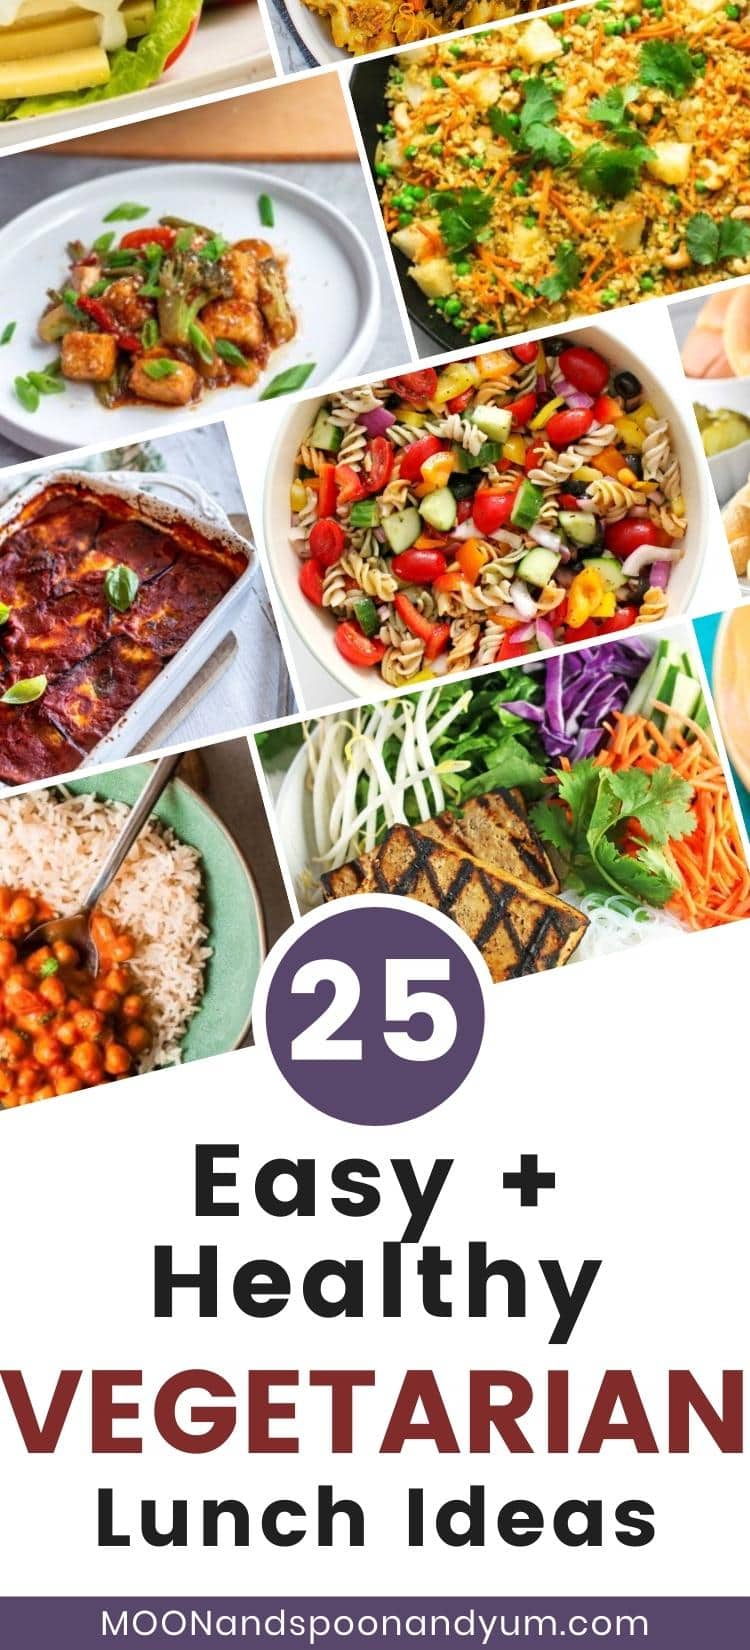 25 Easy and Healthy Vegetarian Lunch Ideas - MOON and spoon and yum